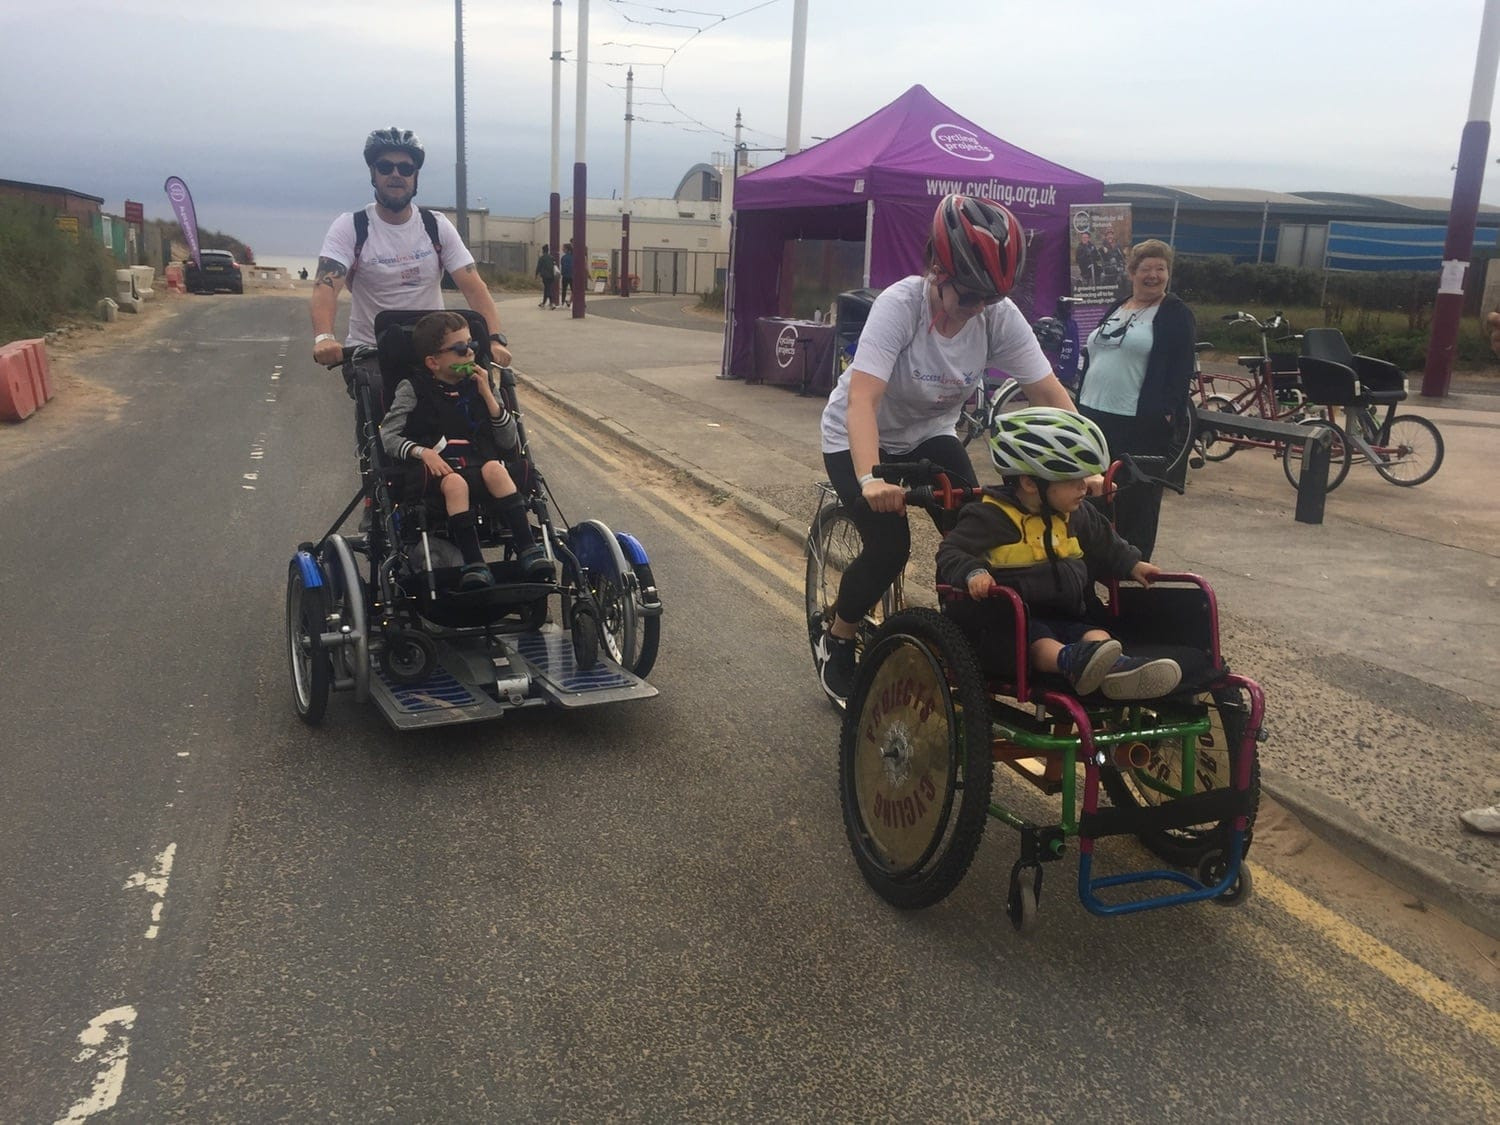 Riding adapted bikes in Blackpool